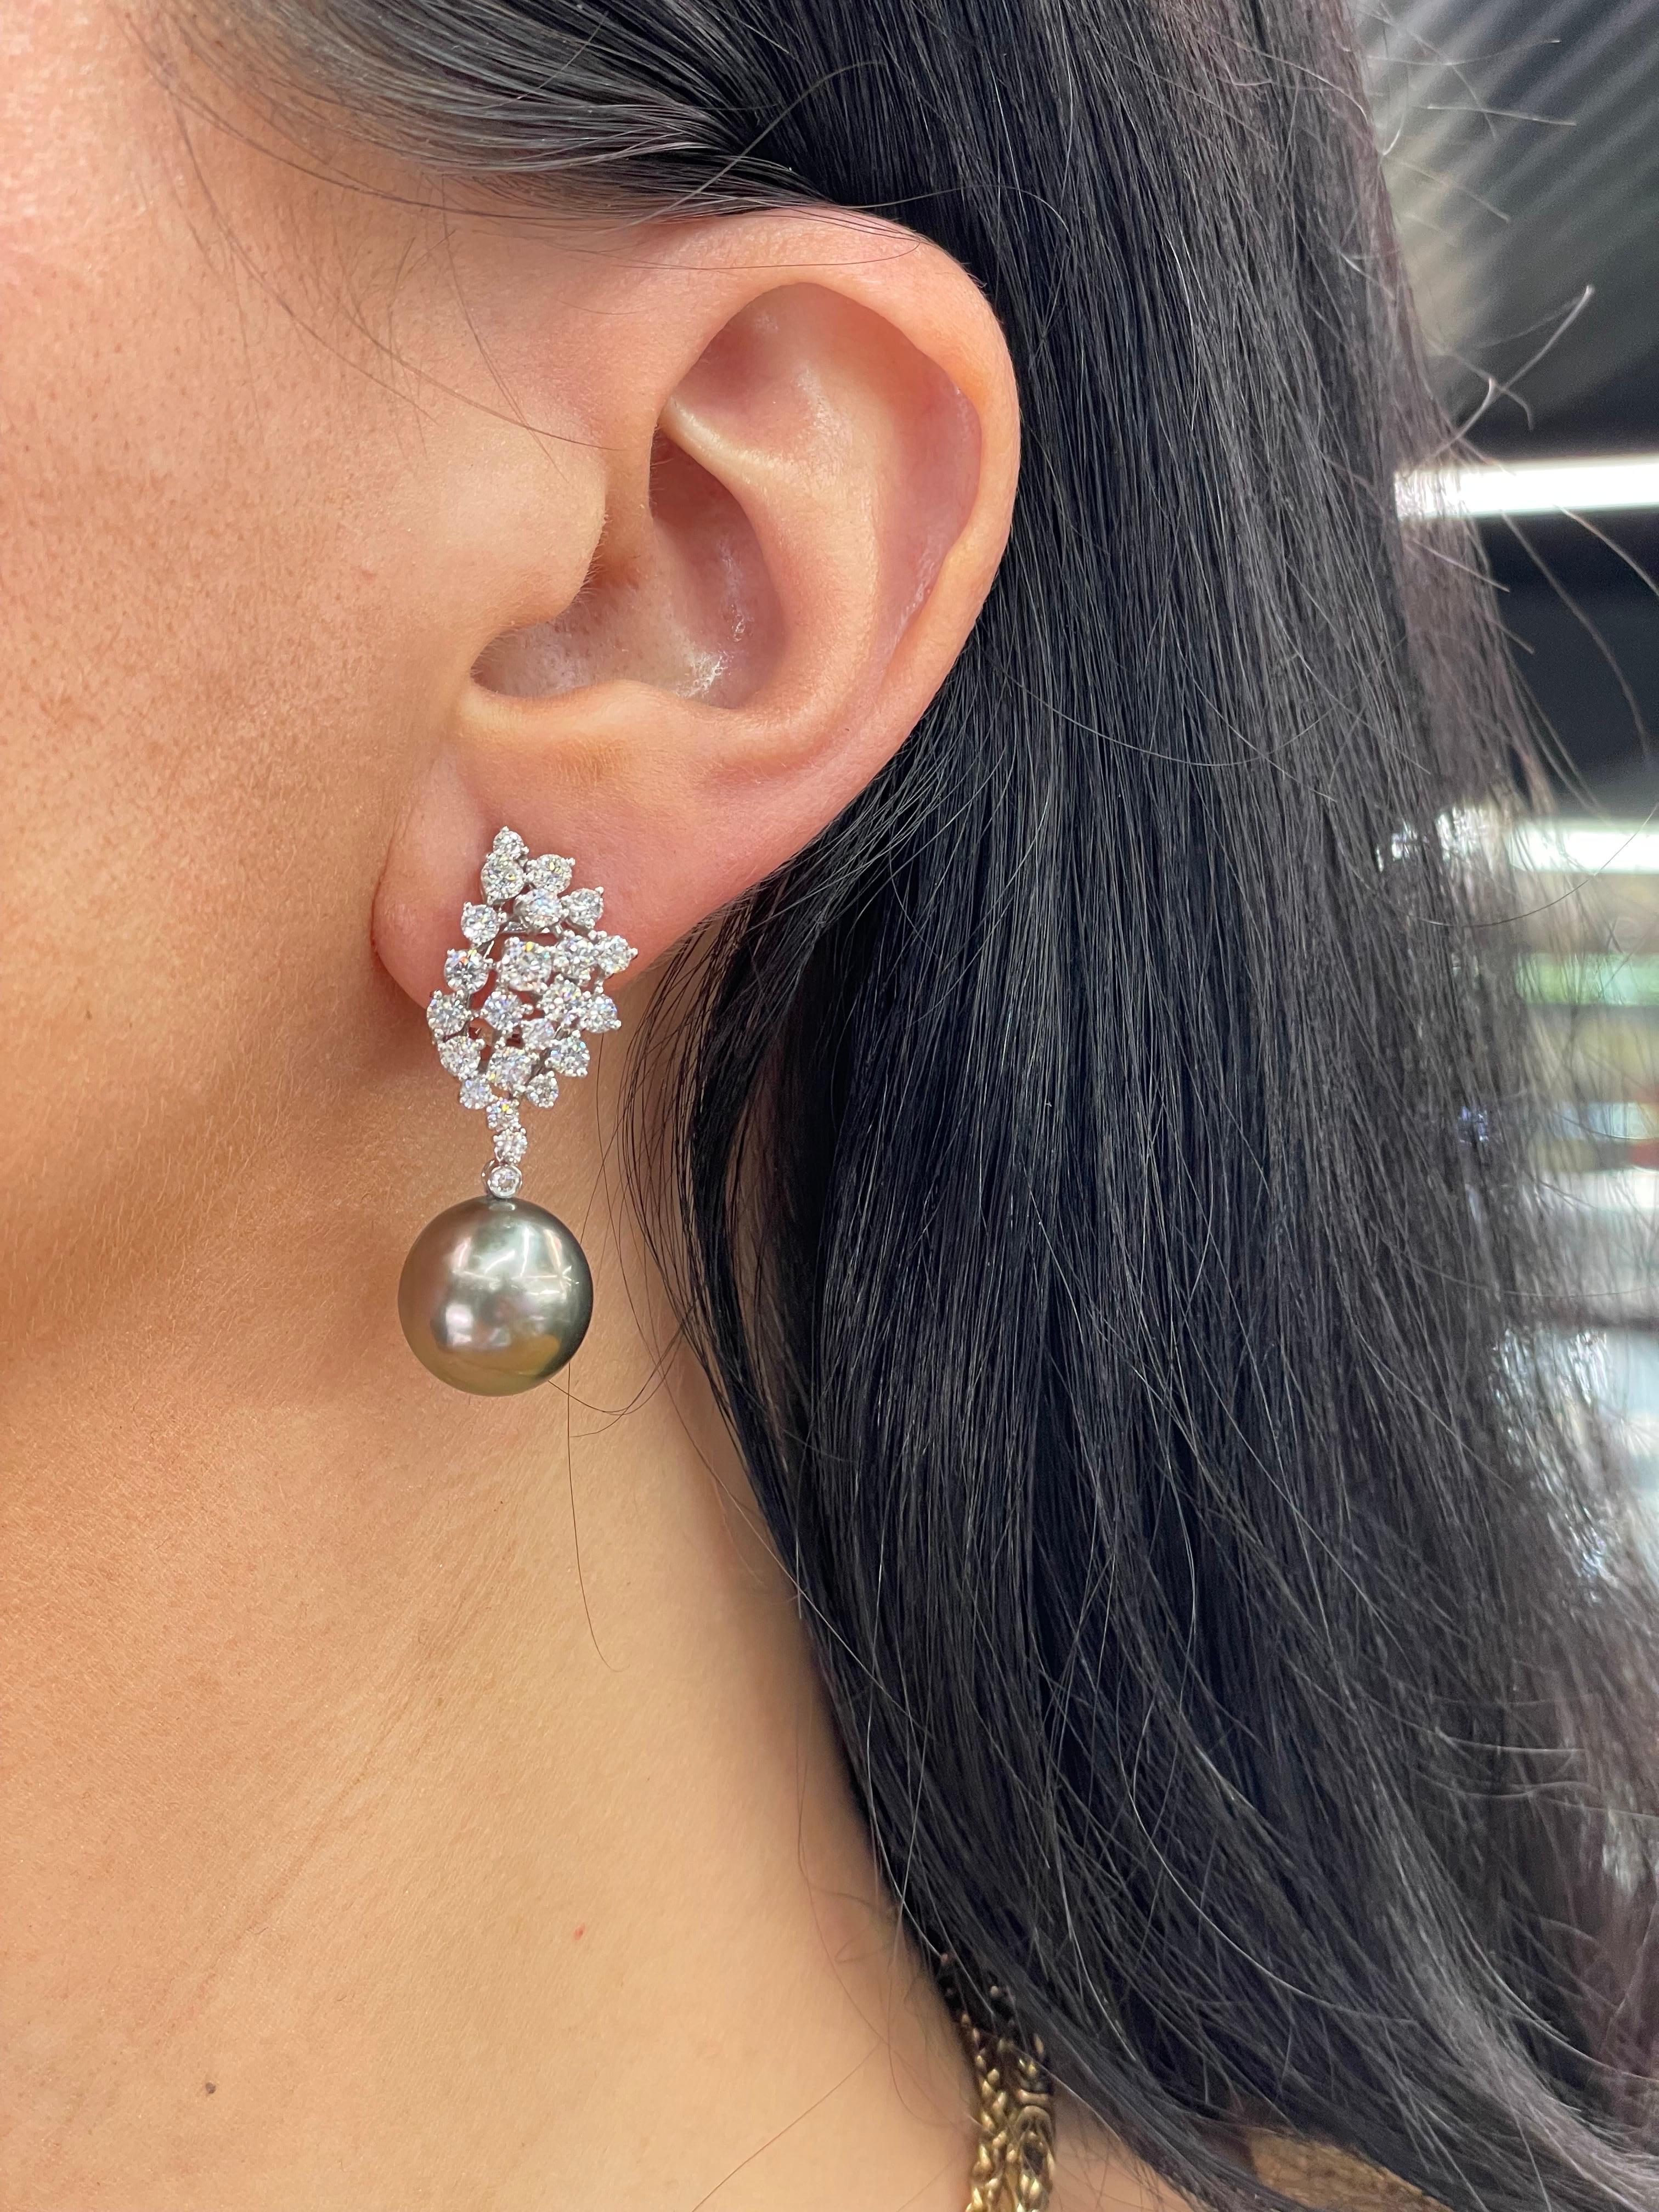 18 Karat White Gold drop earrings featuring a cluster of round brilliants weighing 2.70 carats and two Tahitian pearls measuring 13-14 MM
Color G-H
Clarity SI

Comes in South Sea, Golden & Pink Pearls
DM for more information & pricing 